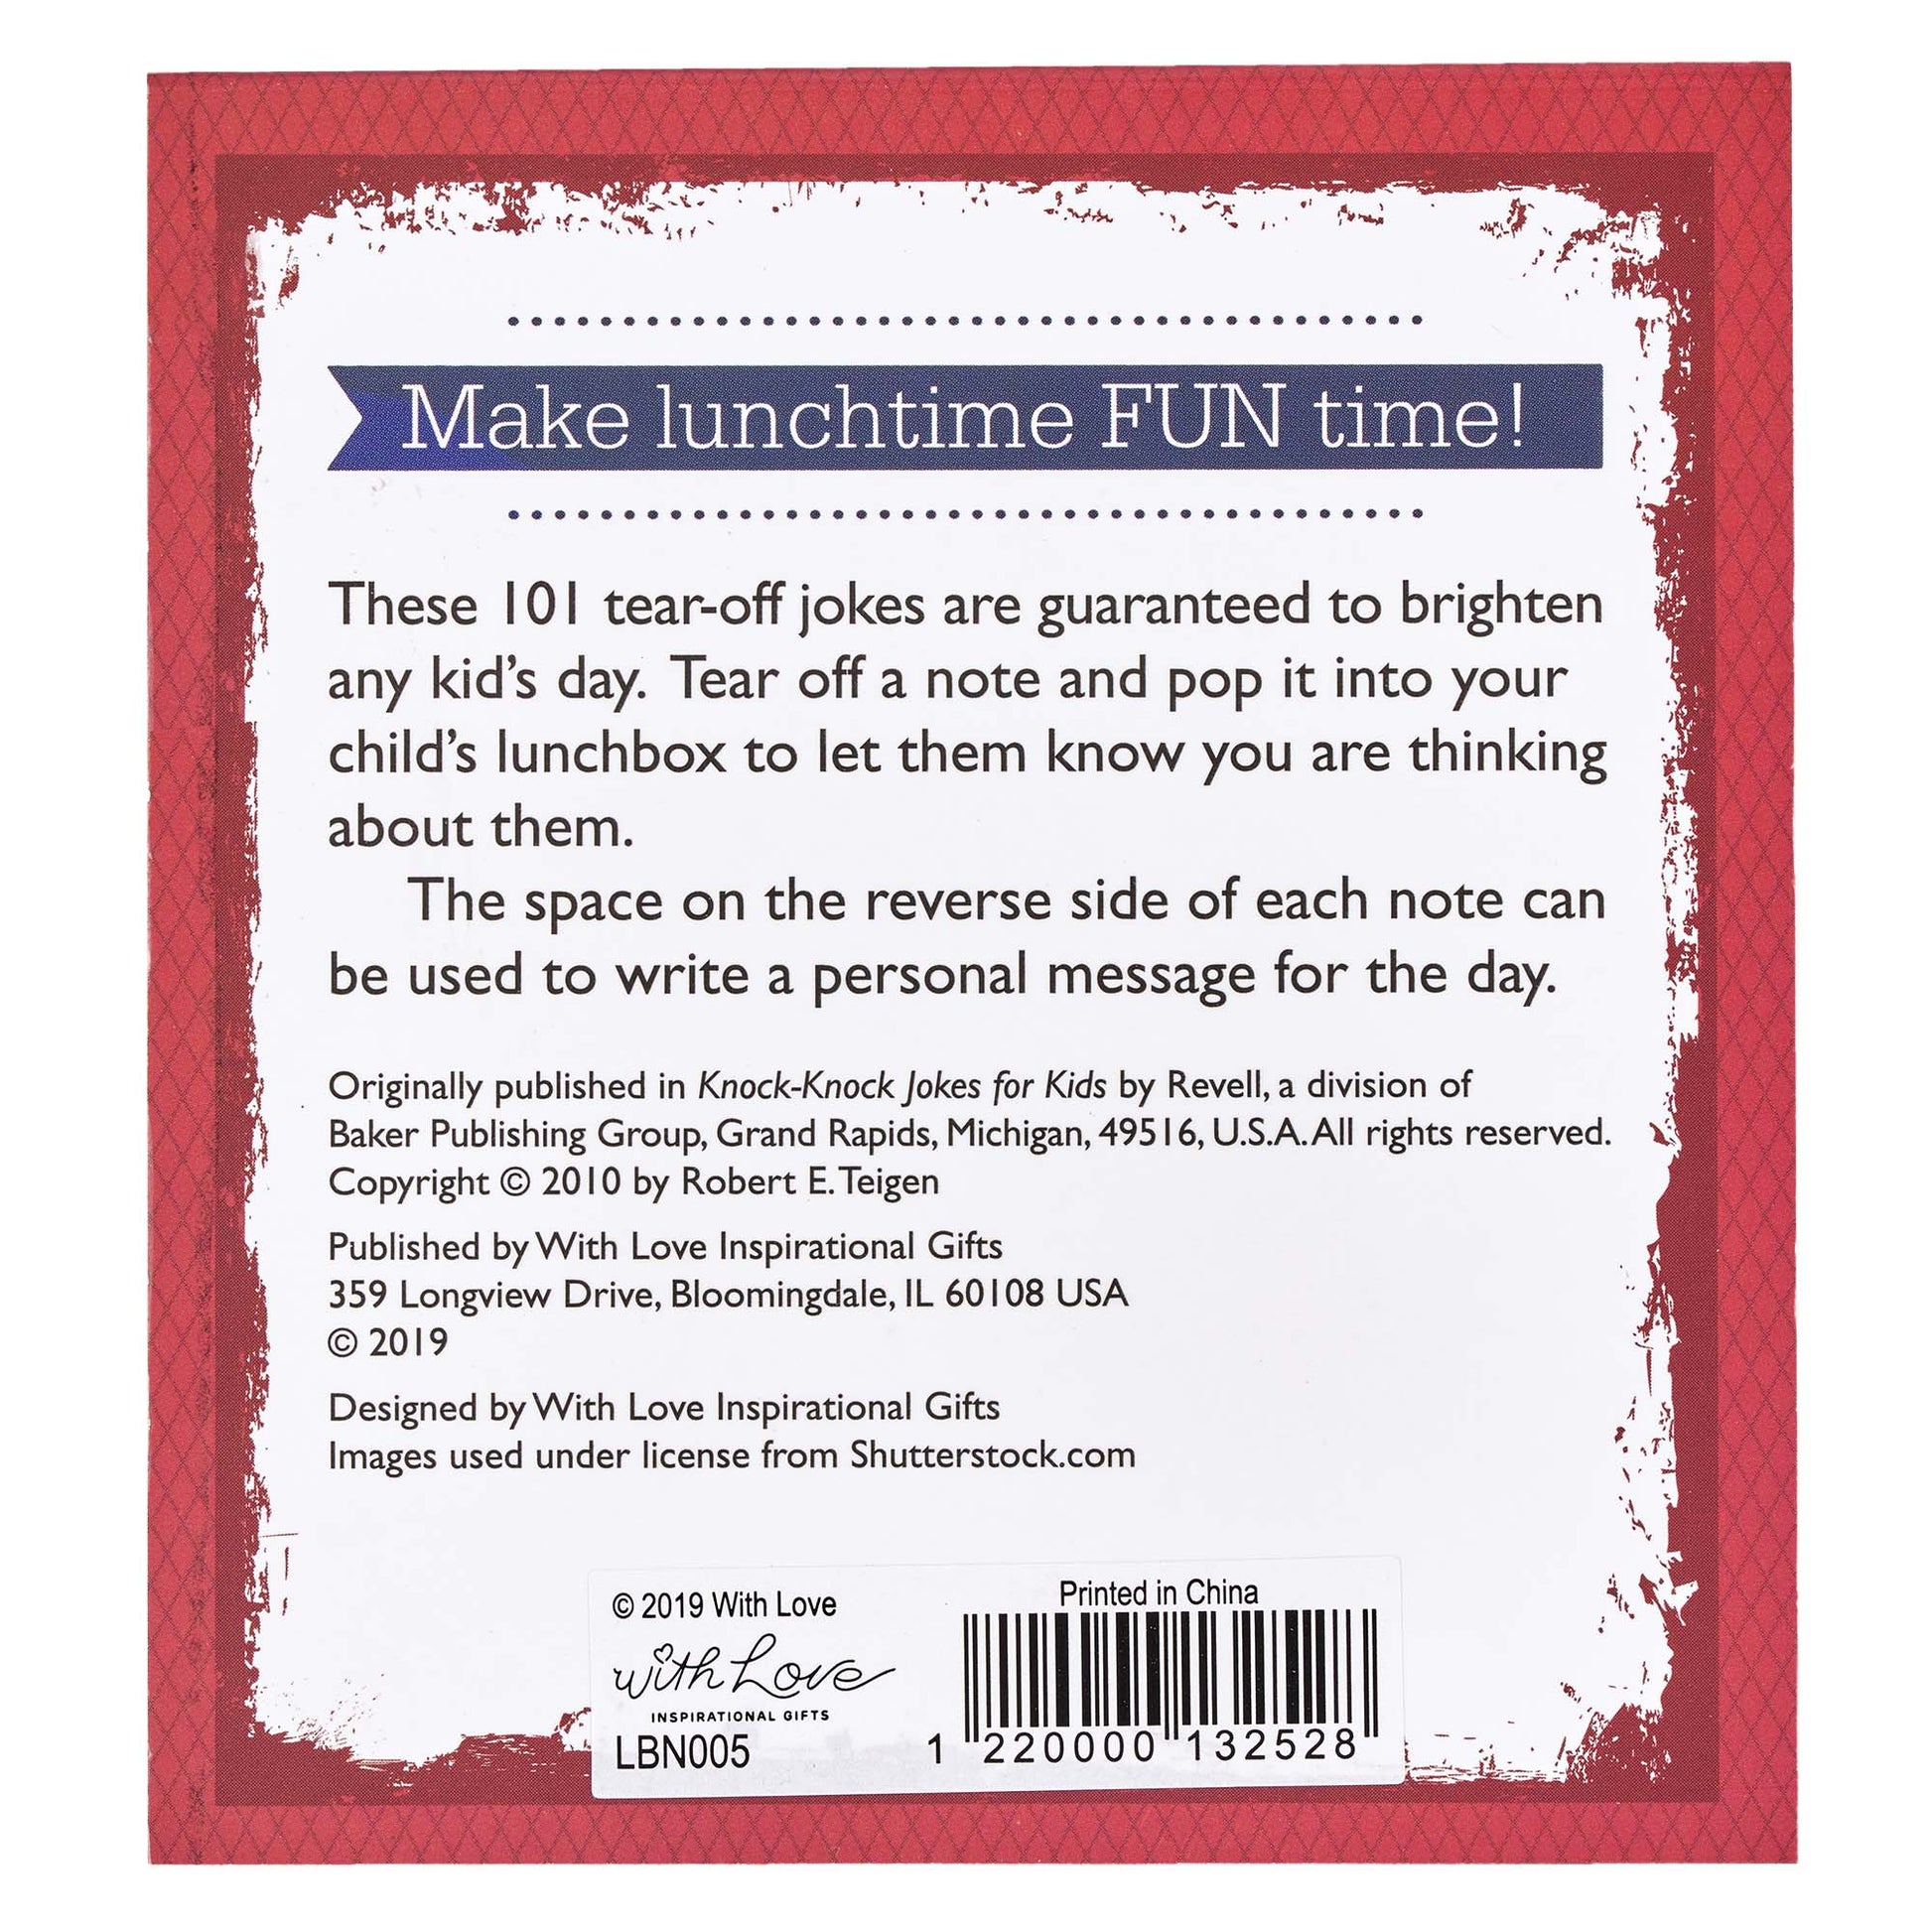 101 Lunchbox Notes with Knock-Knock Jokes for Kids - The Christian Gift Company